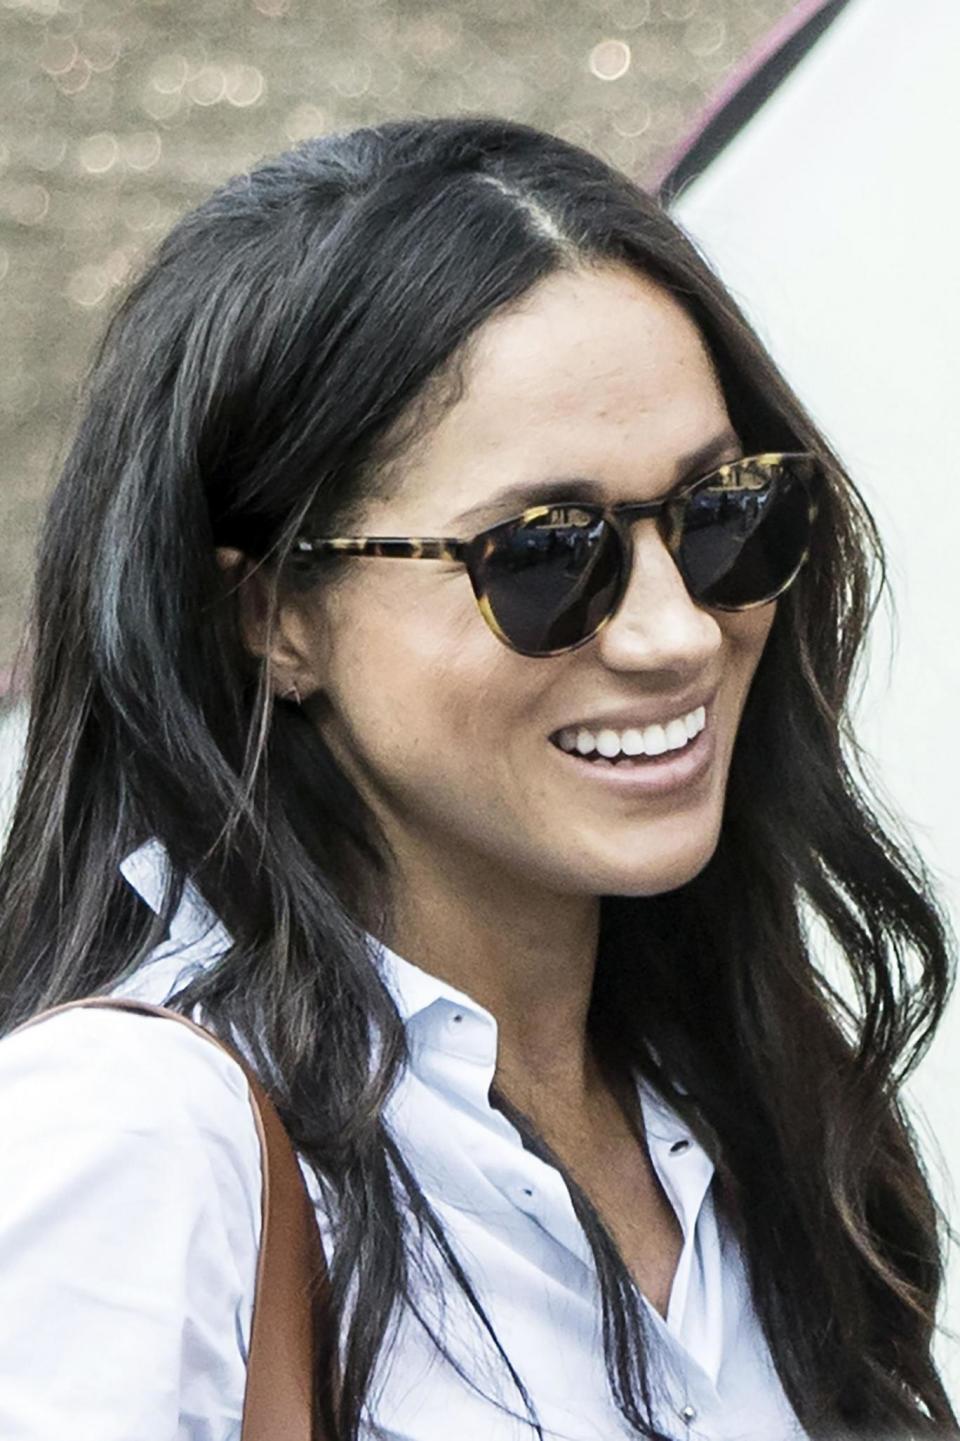 Meghan Markle is believed to have moved to London to be with Harry permanently (PA)